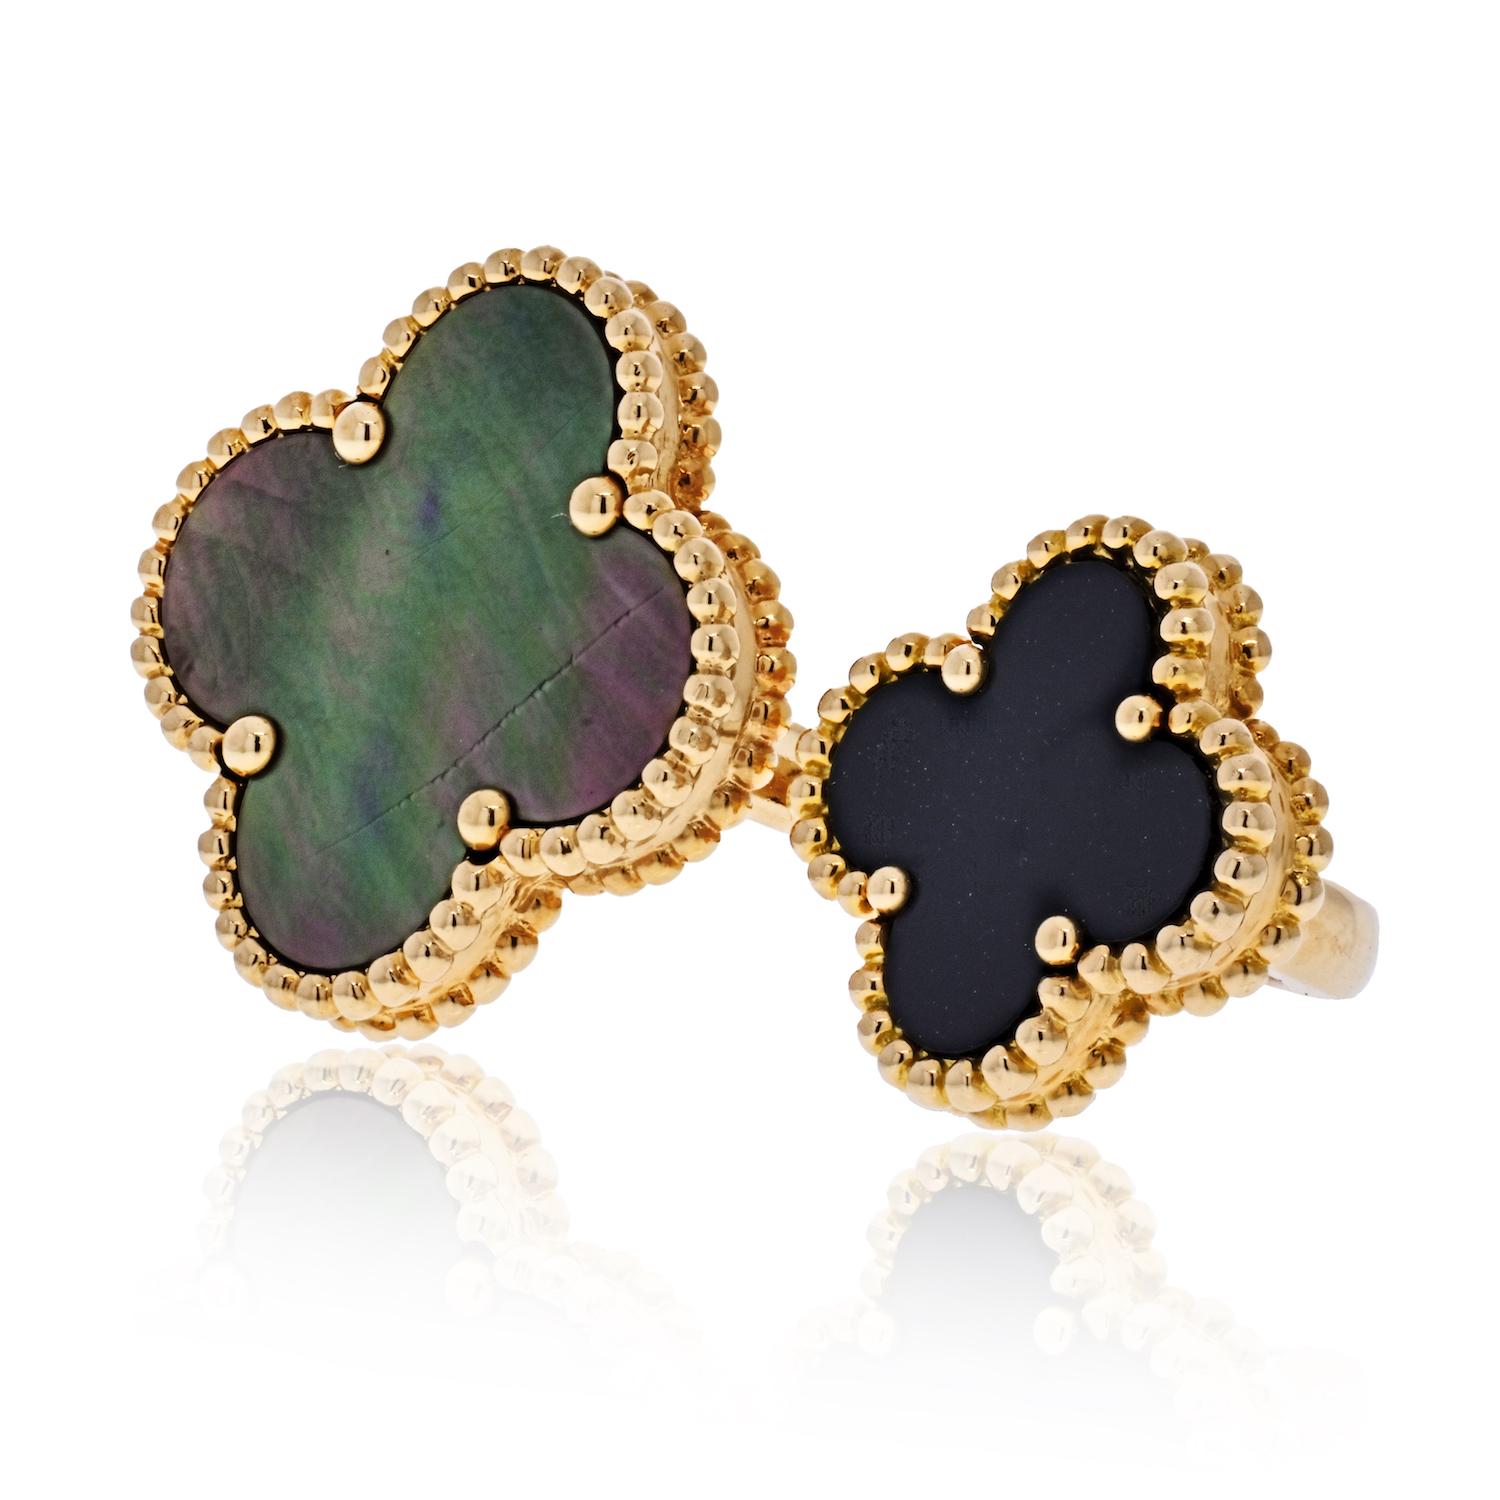 Van Cleef & Arpels 18K Yellow Gold Grey Mother of Pearl and Black Onyx Magic Alhambra Between the Finger Ring. Size 50 US 5.25.  This stunning open Alhambra ring is crafted of 18k yellow gold and features two clover motifs one 20mm set in grey